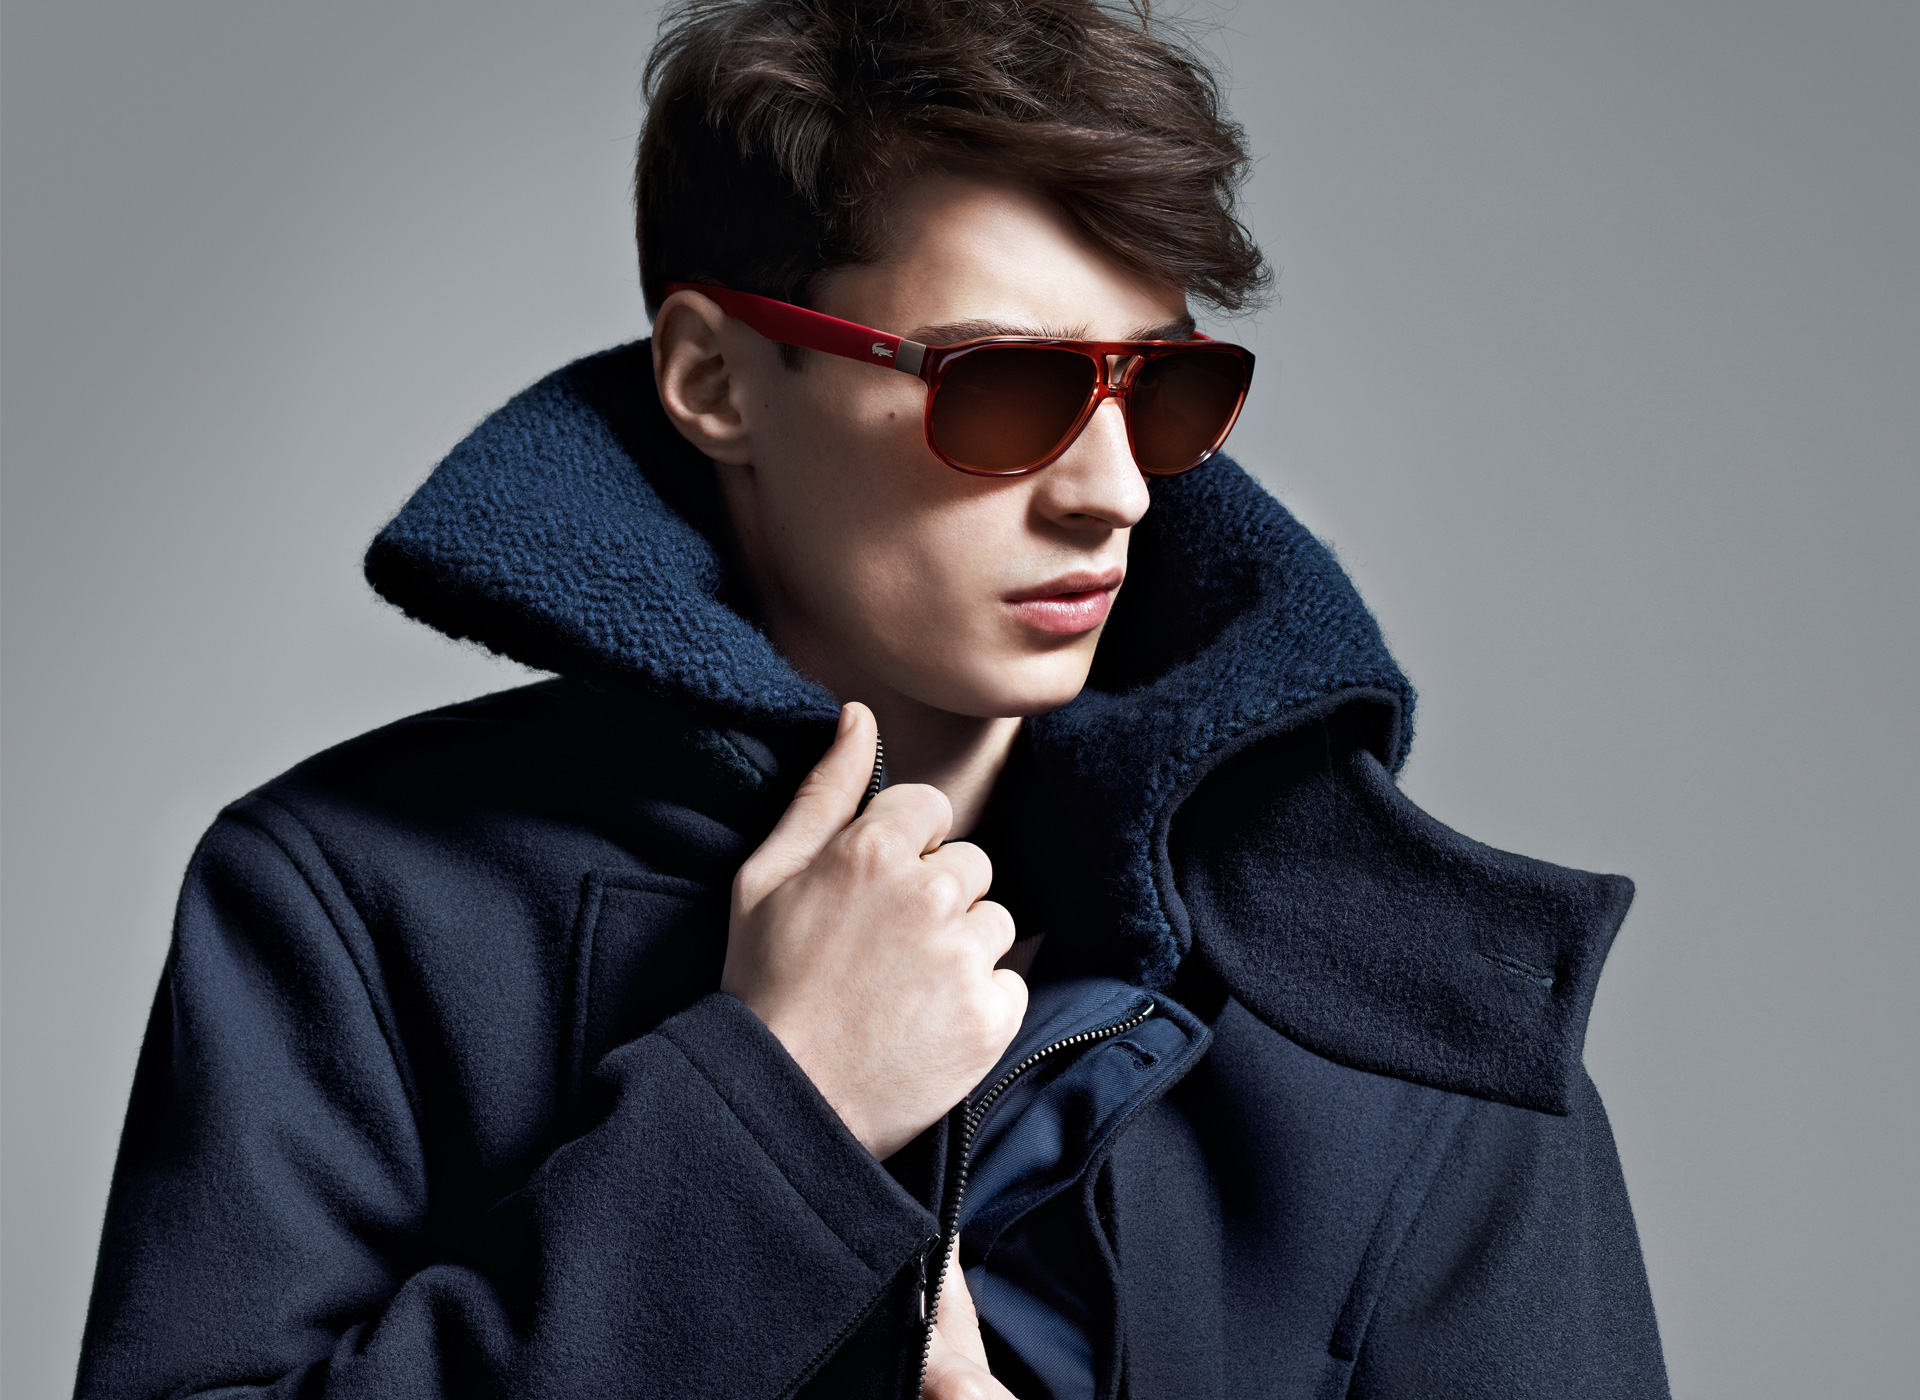 Adrien Sahores is in View for Lacoste's Fall/Winter 2012 Eyewear Campaign